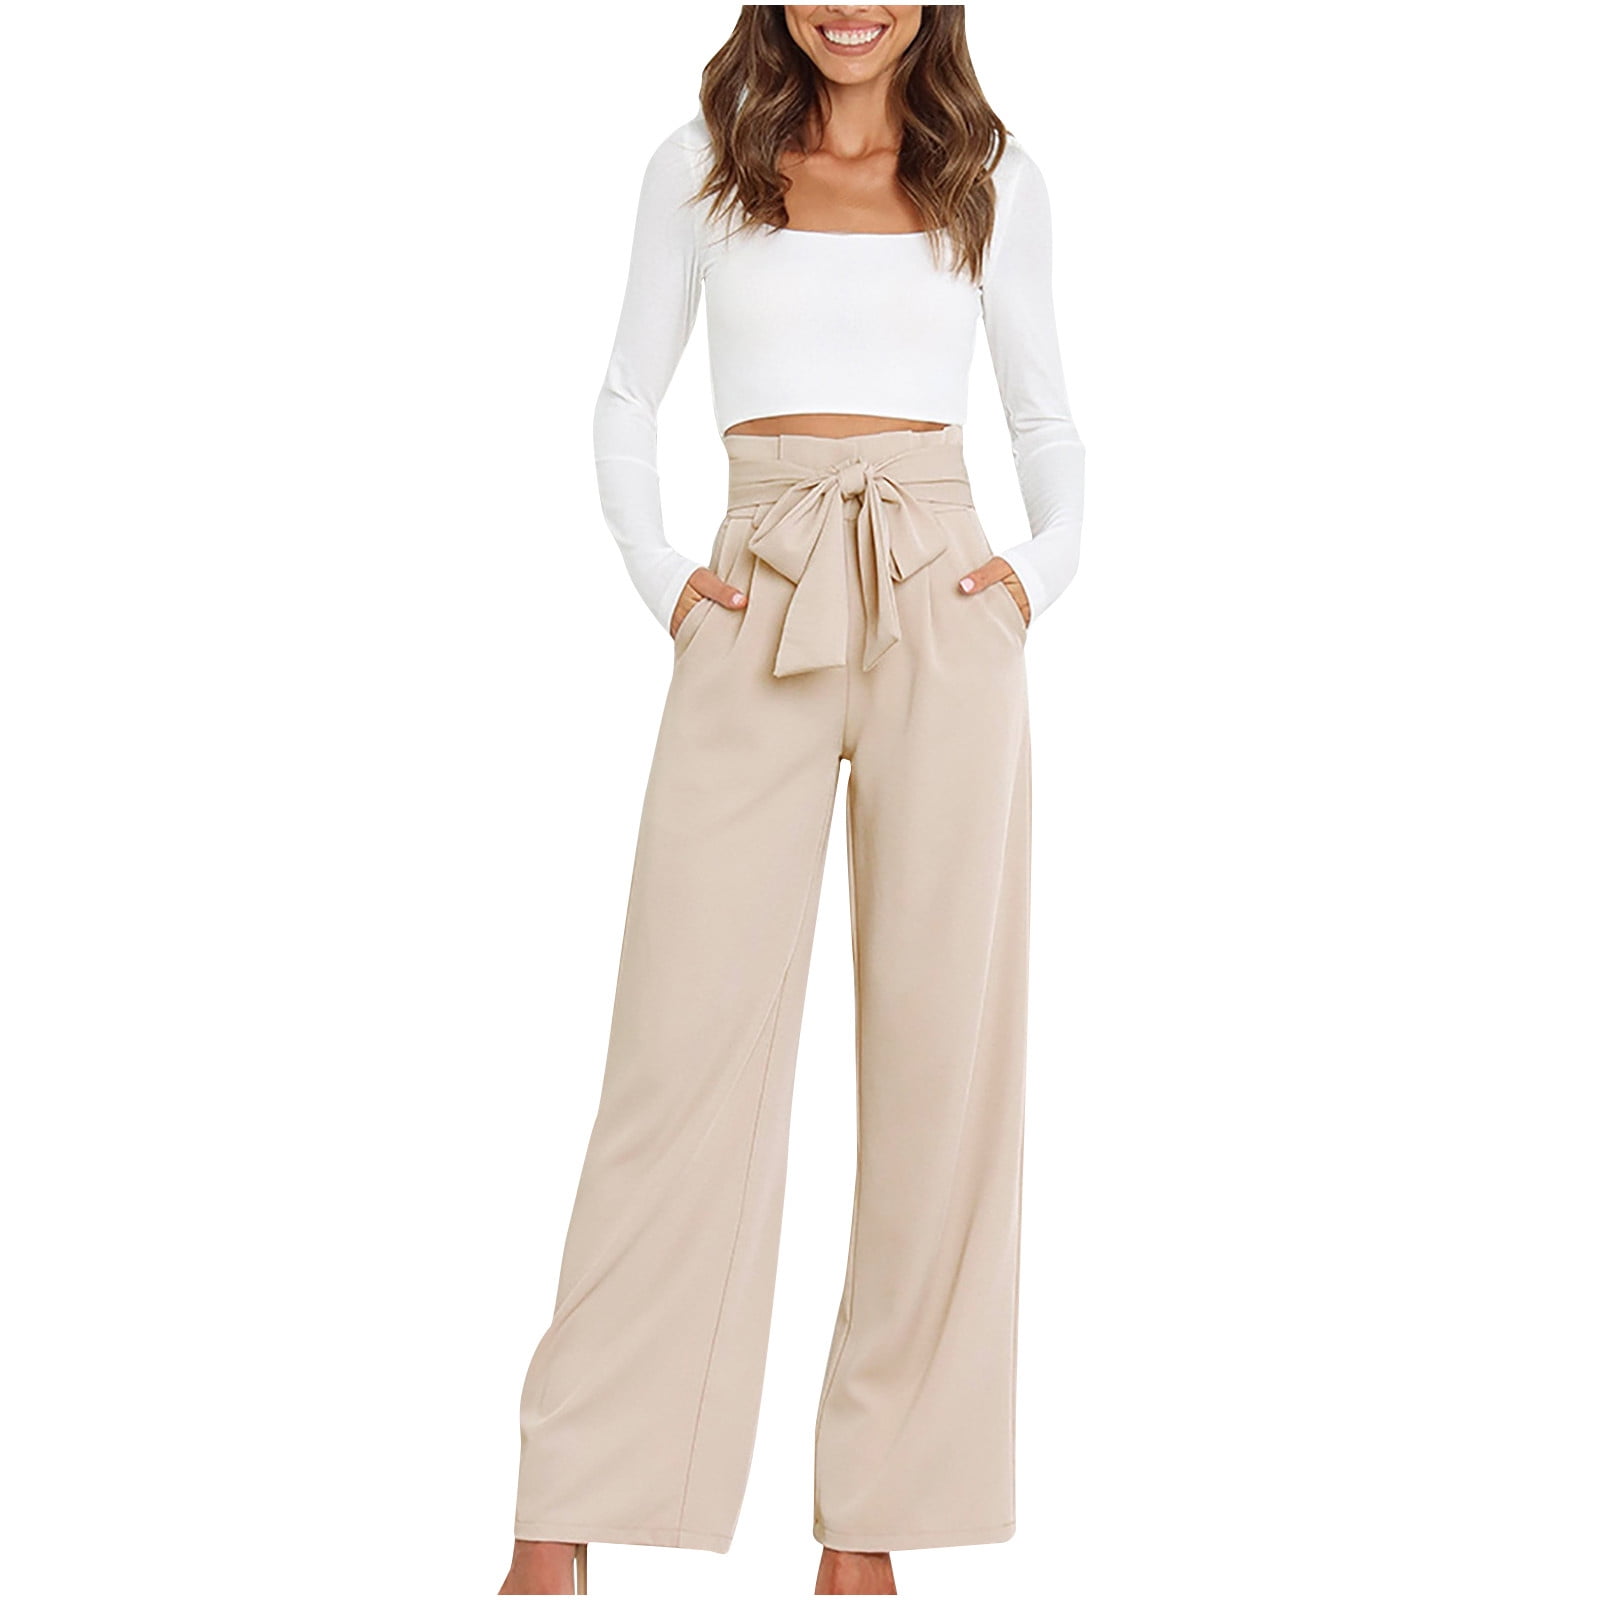 KINPLE Women's Pleated High Waist Belted Satin Wide Leg Pants Casual Work  Office Long Trousers with Pockets